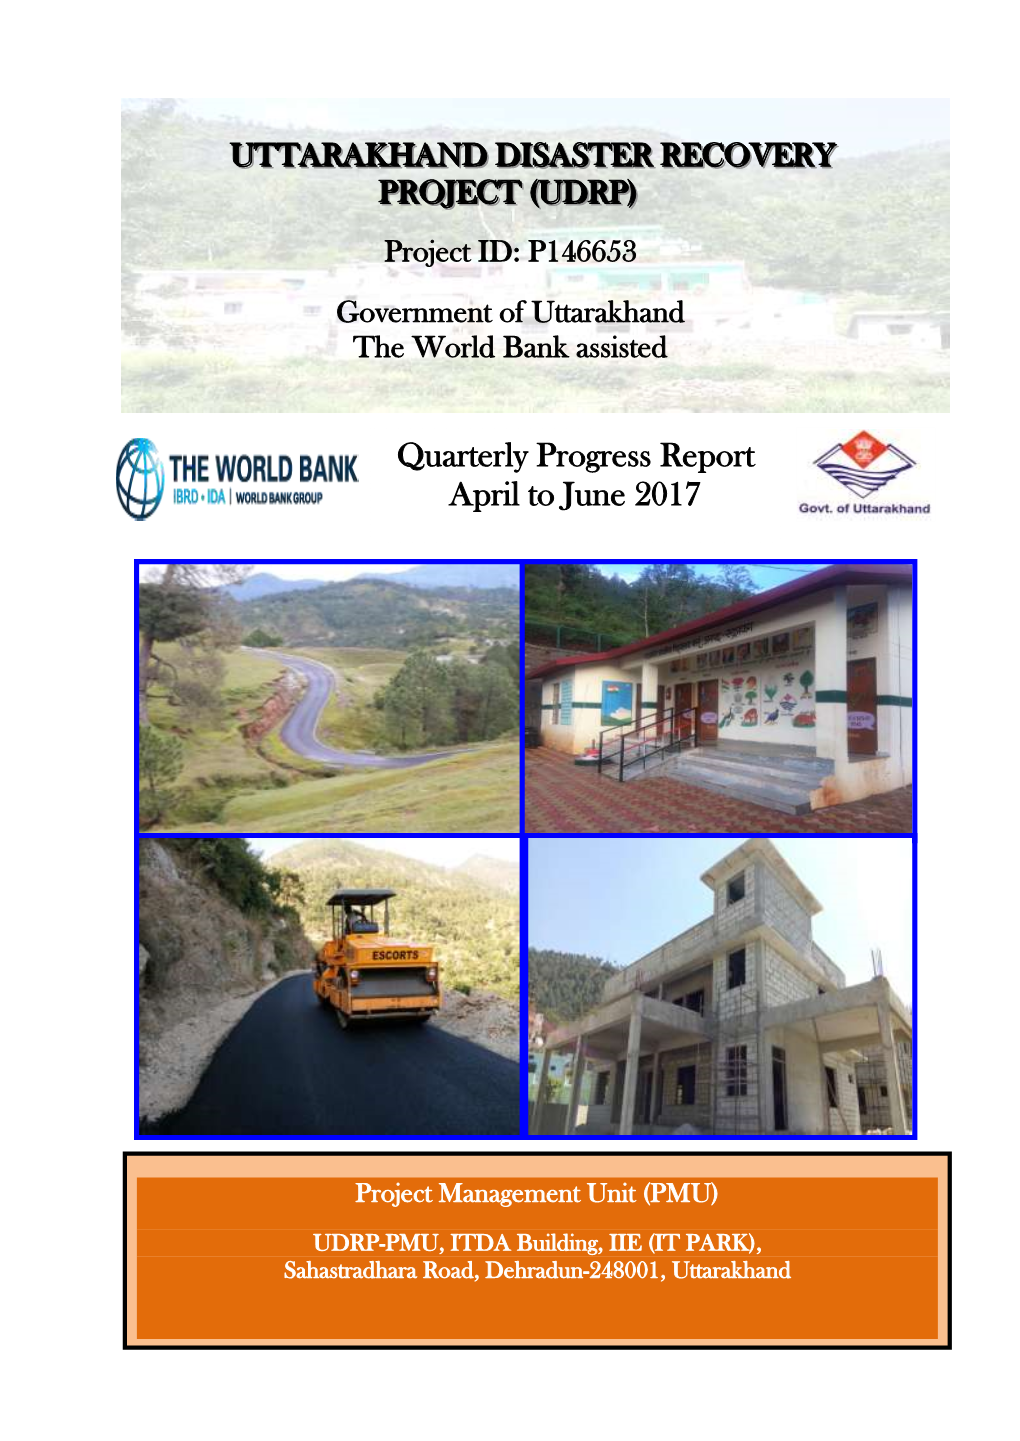 Project ID: P146653 Government of Uttarakhand the World Bank Assisted